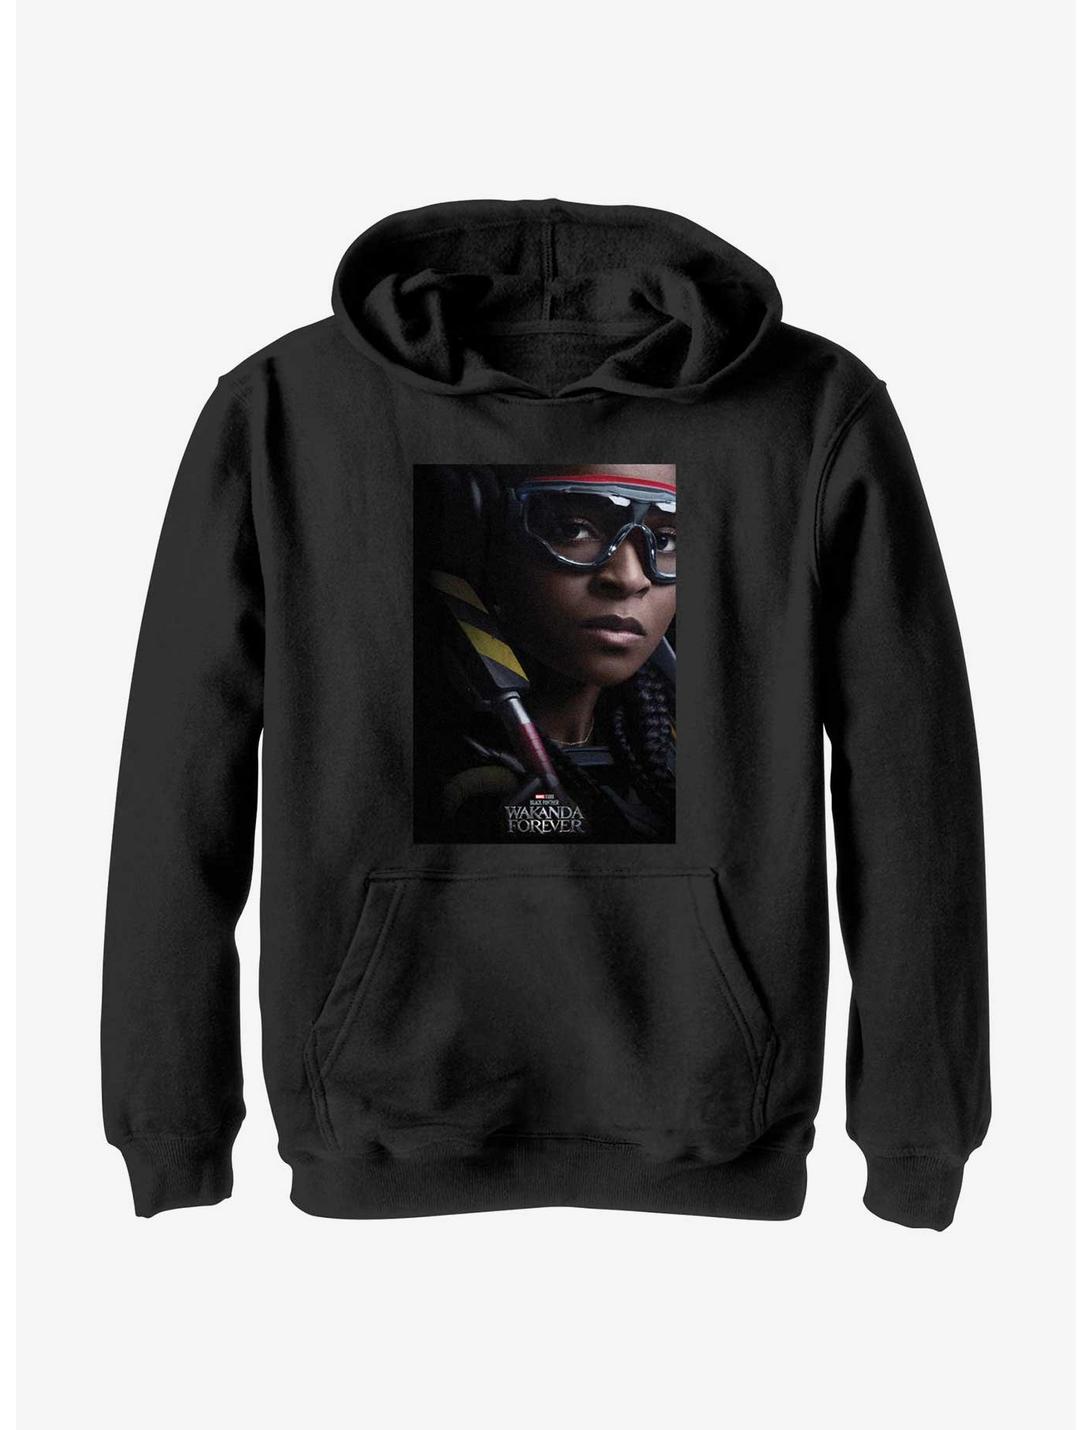 Marvel Black Panther: Wakanda Forever Iron Heart Movie Poster Youth Hoodie, BLACK, hi-res